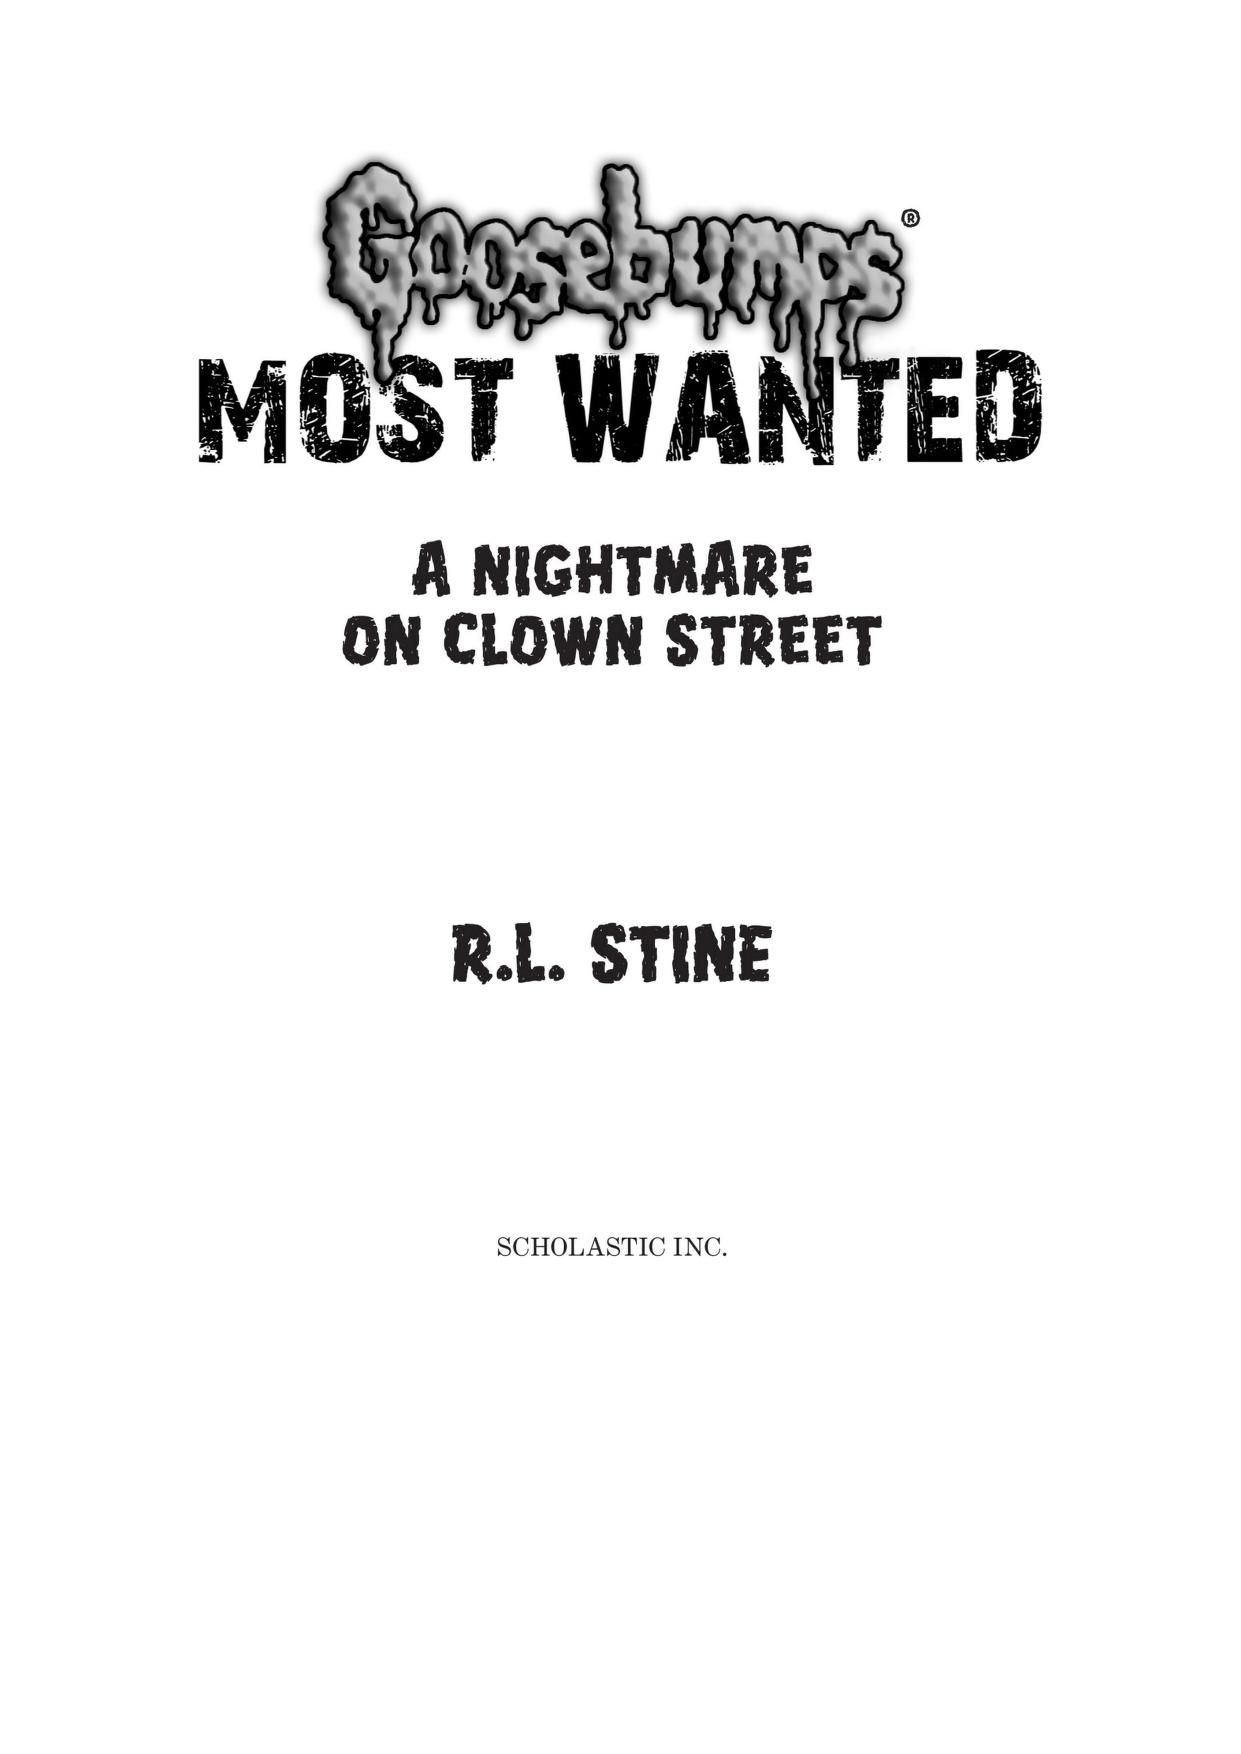 A nightmare on clown street pdf download hp software download printer